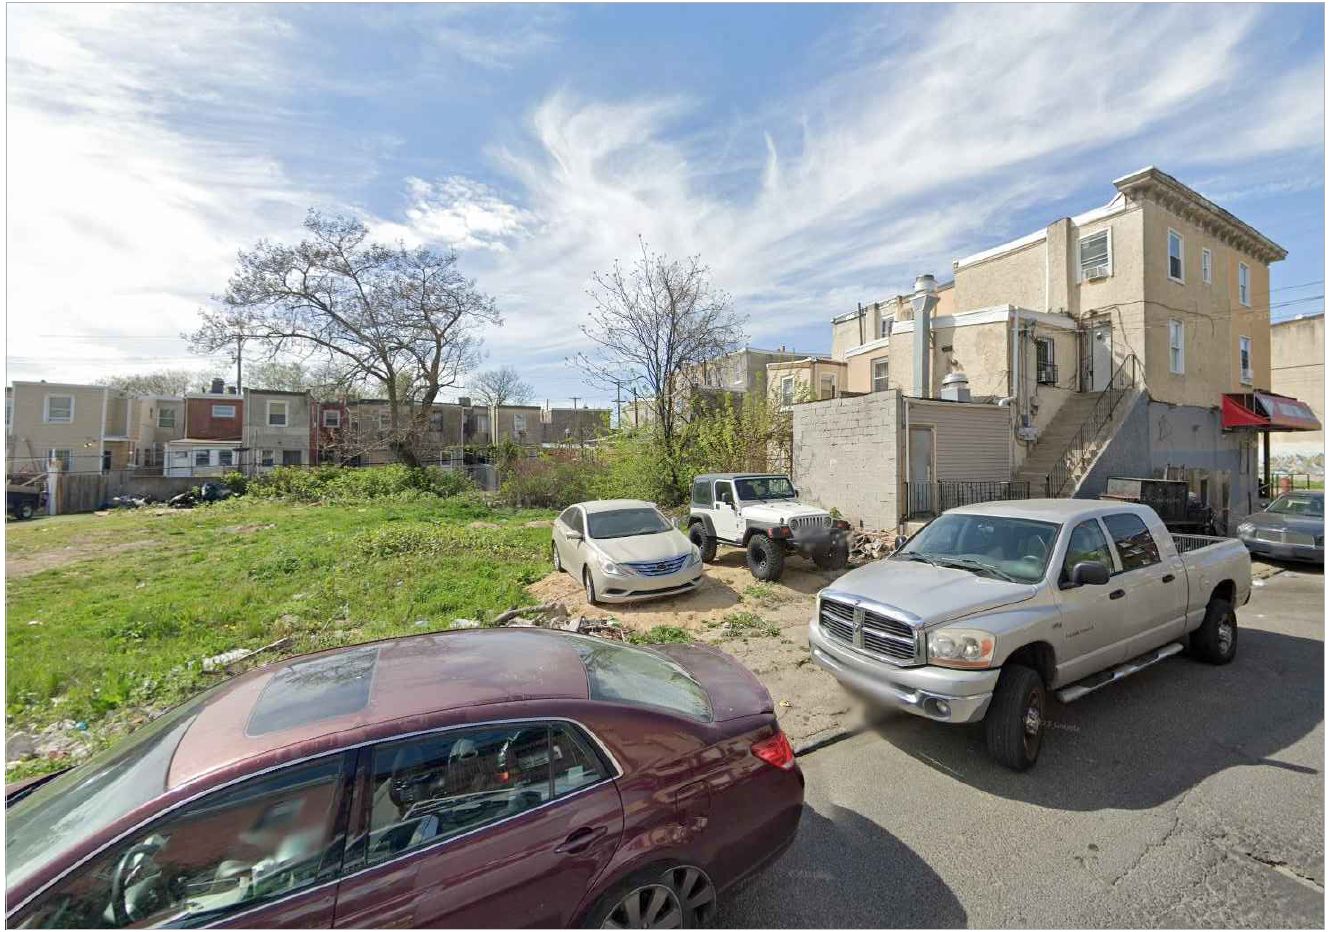 2540 North 6th Street. Site conditions prior to redevelopment. Credit: JT Ran Expediting via the City of Philadelphia Department of Planning and Development